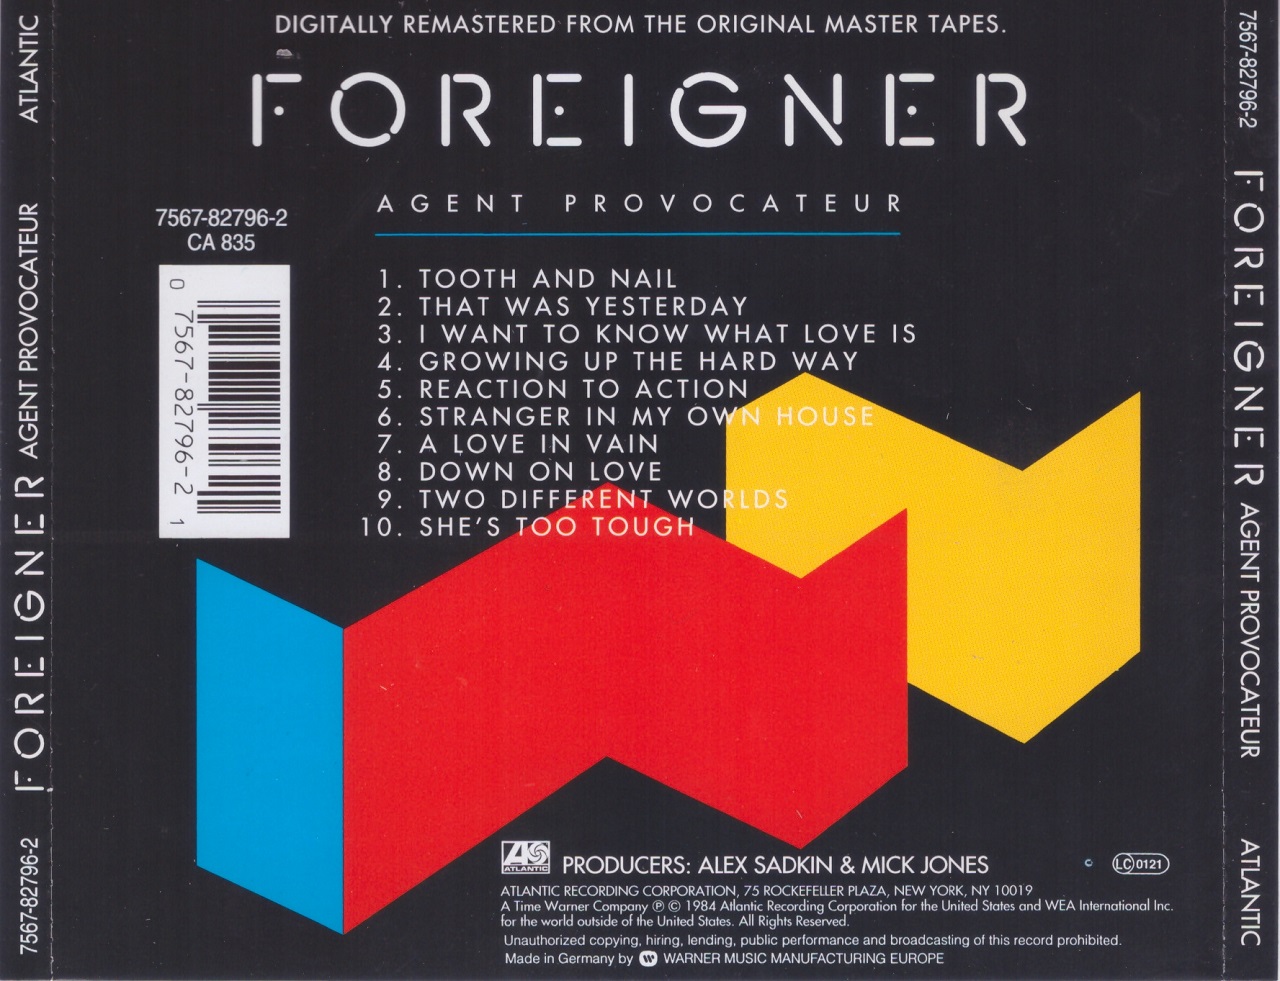 On The Road Again: Foreigner 